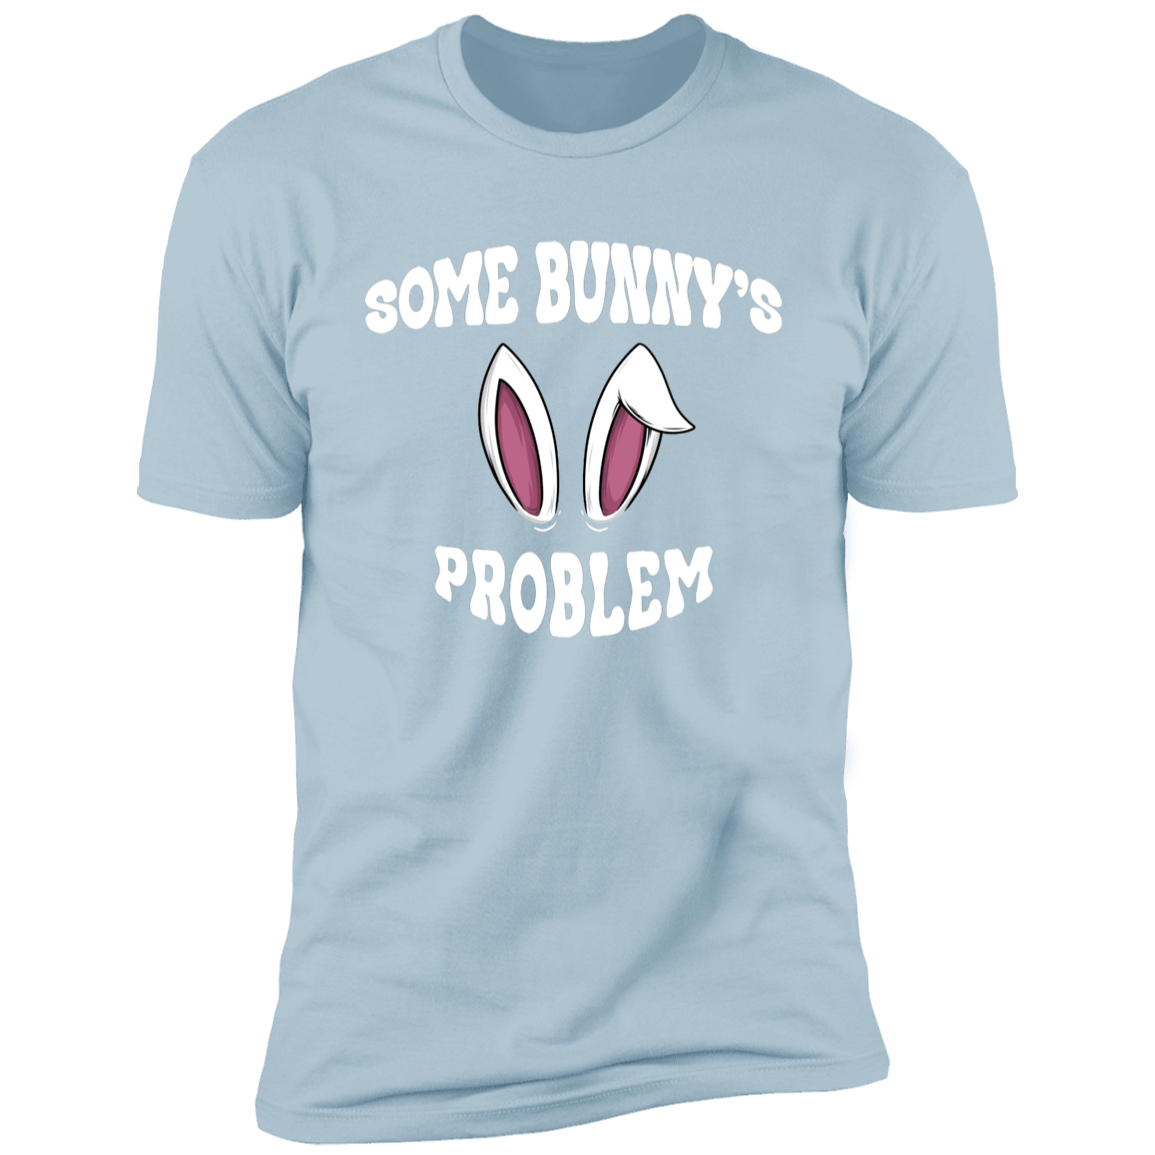 Some Bunny & Some Bunny's Problem Easter Couples Tees